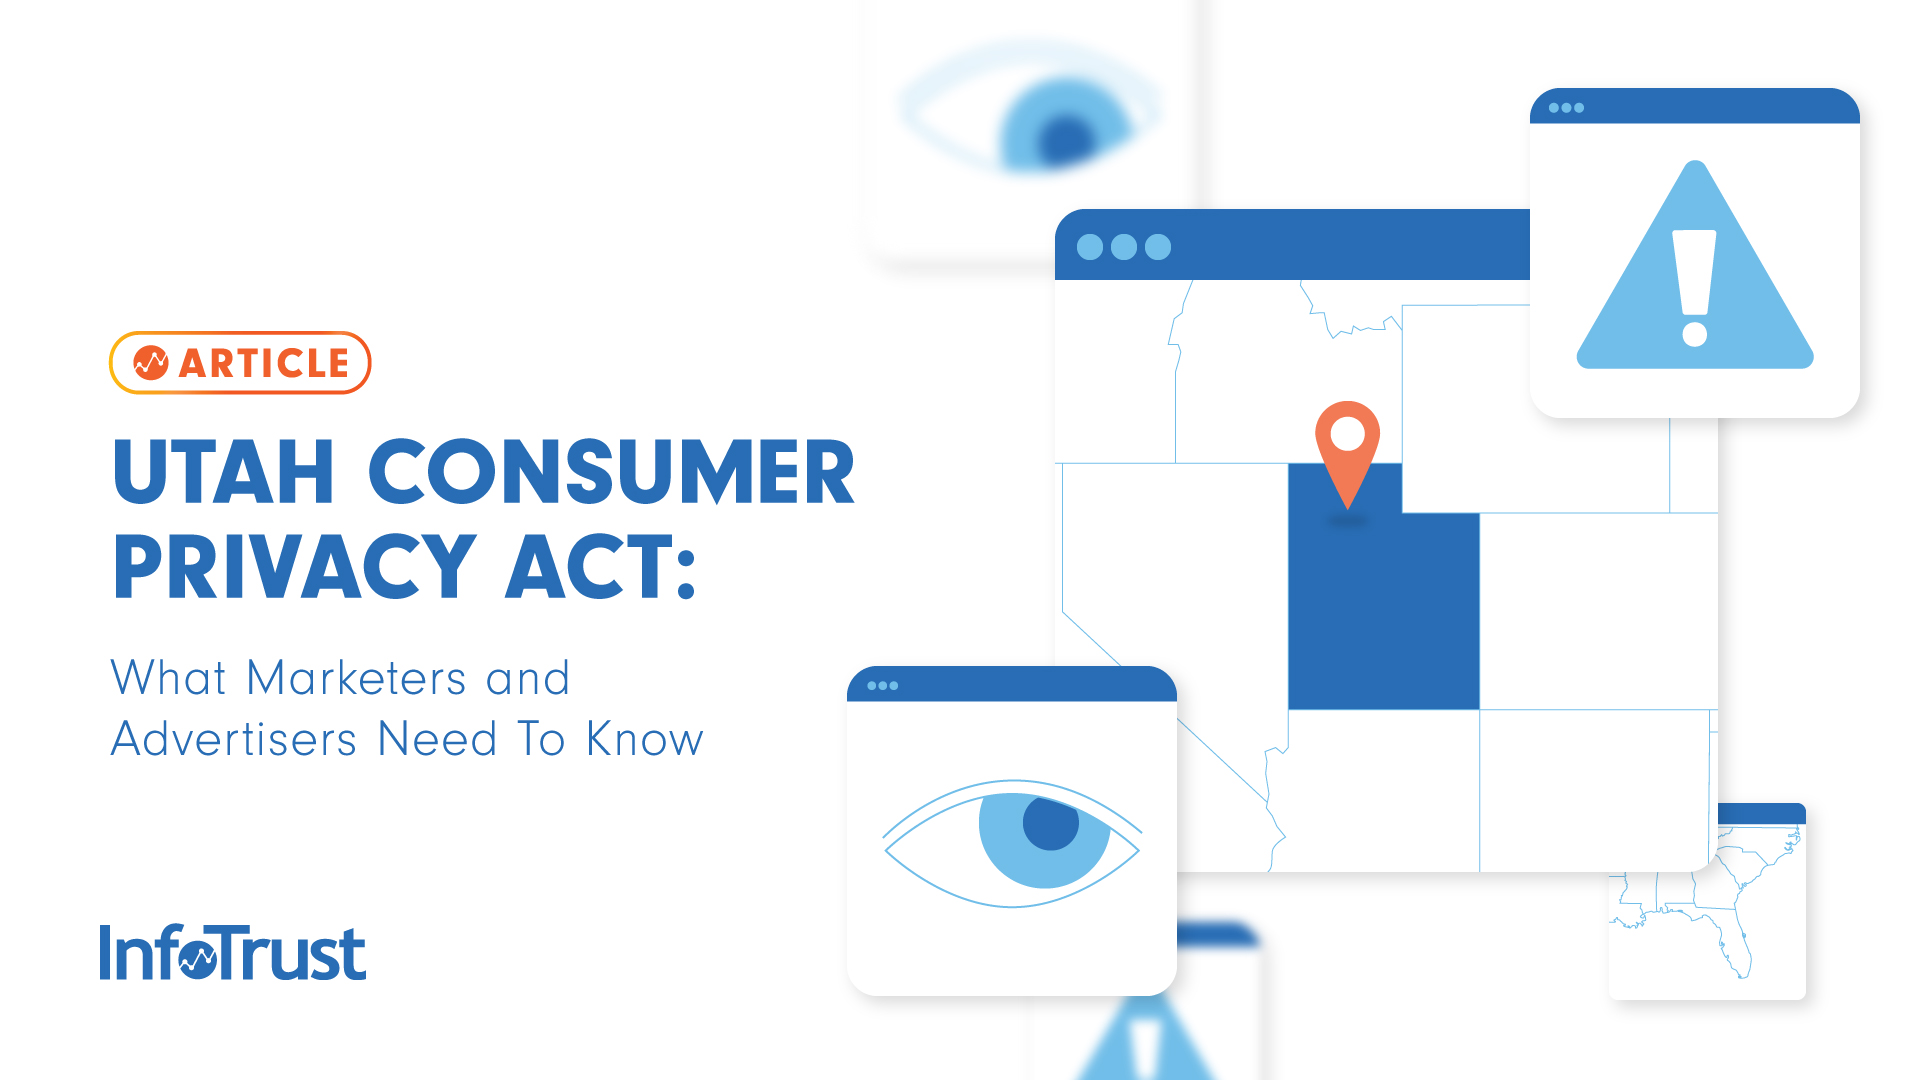 Utah Consumer Privacy Act: What Marketers and Advertisers Need to Know